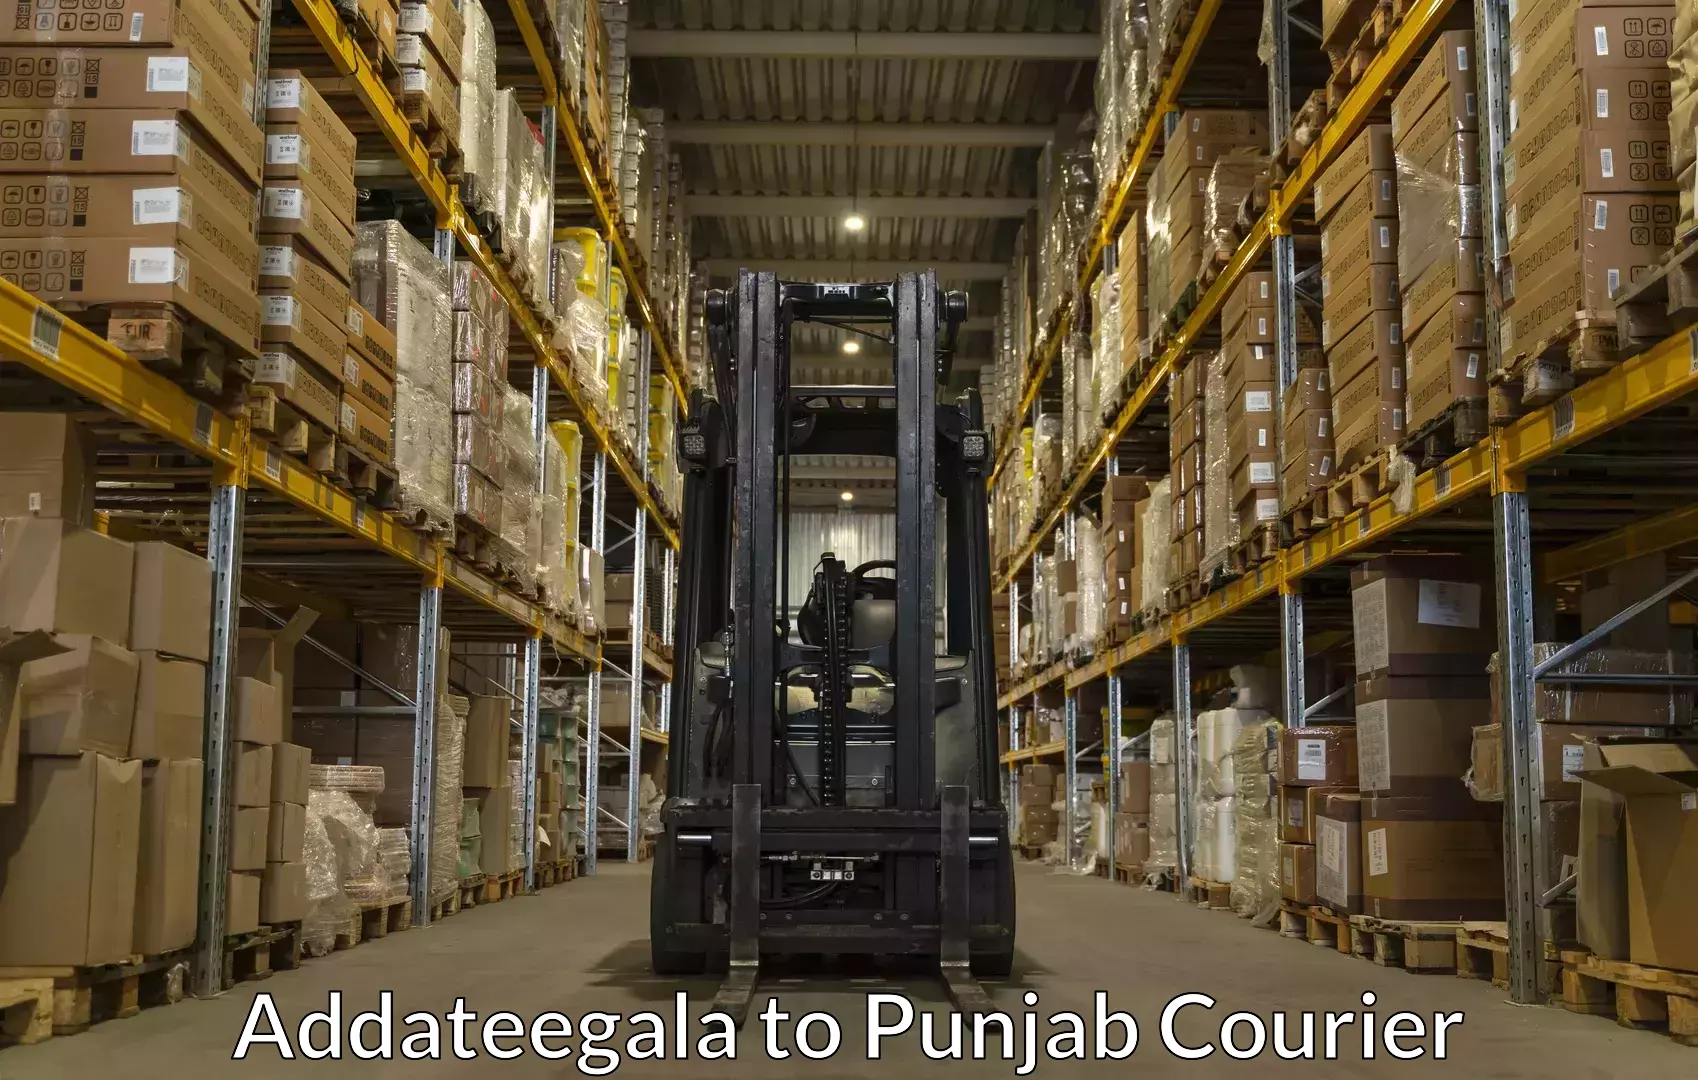 Budget-friendly movers in Addateegala to Moga